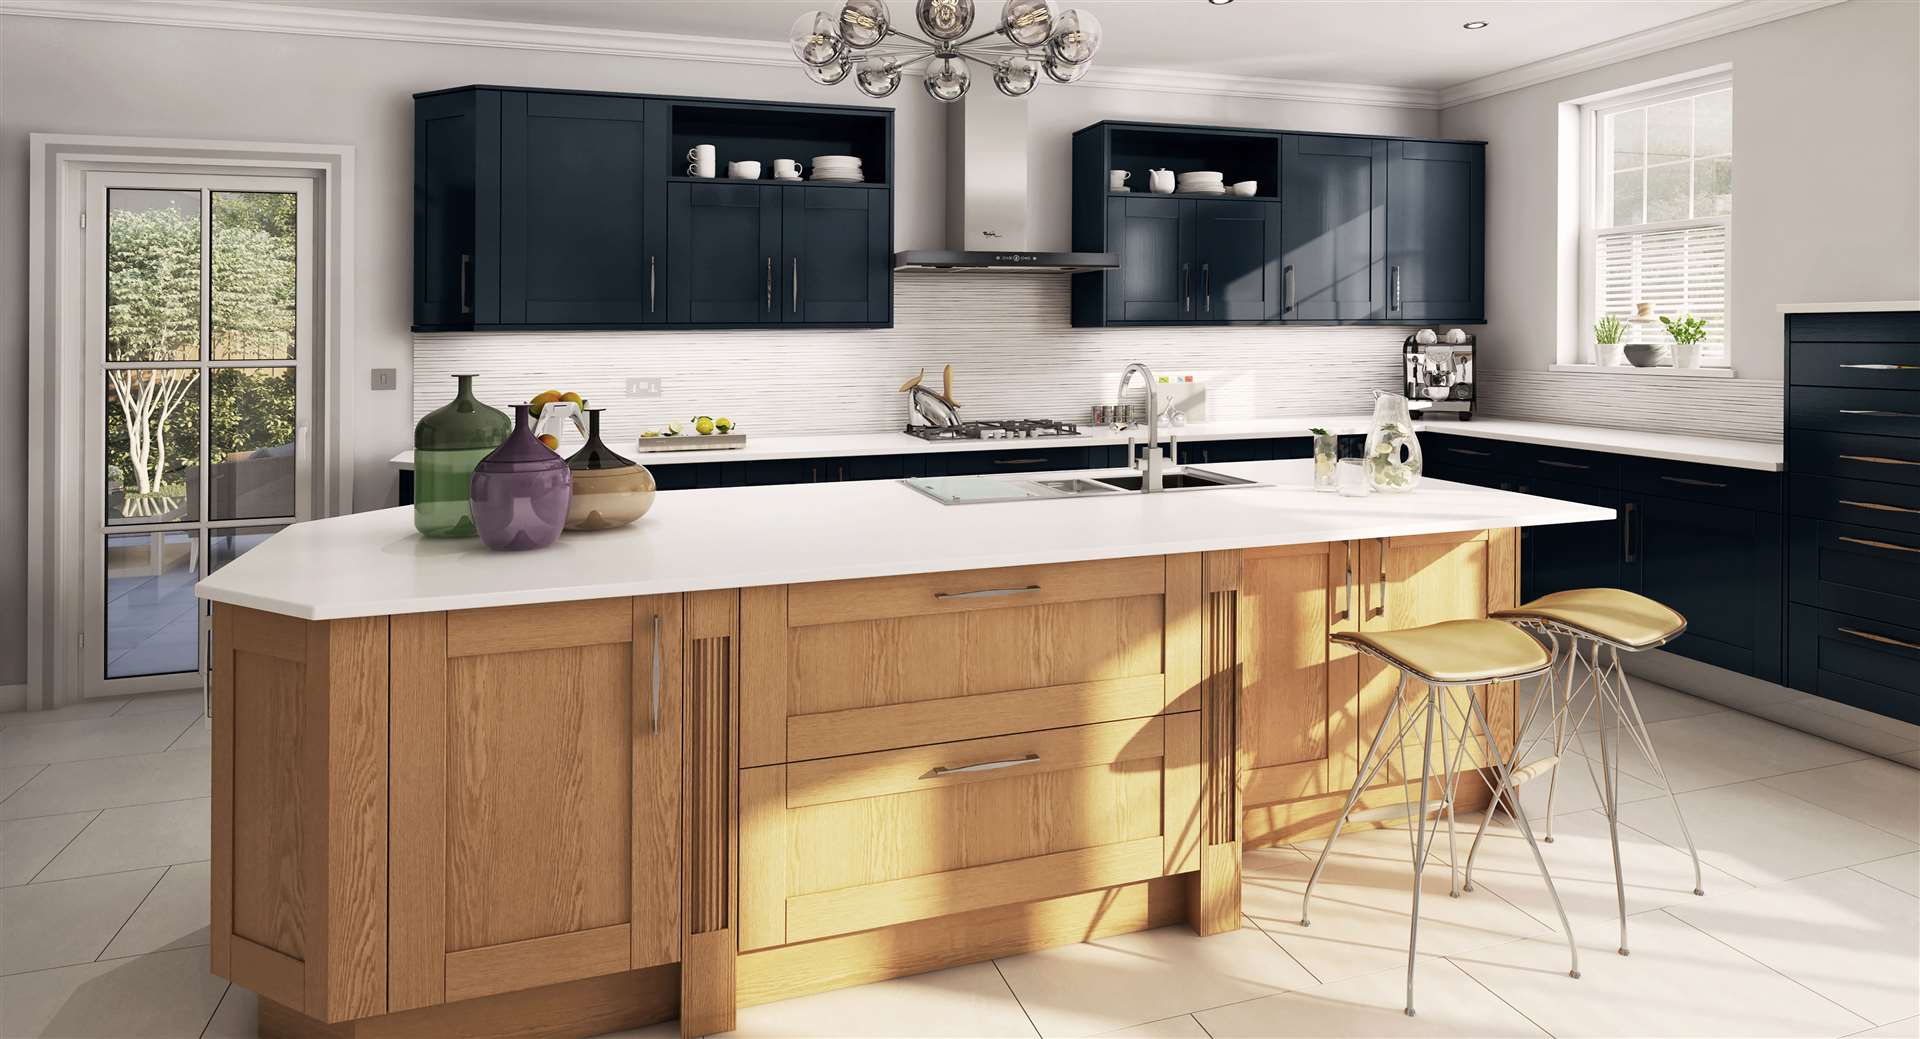 Paul Turnham Kitchens have a strong reputation for creative kitchen design, providing a friendly, approachable and personal service to their clients.